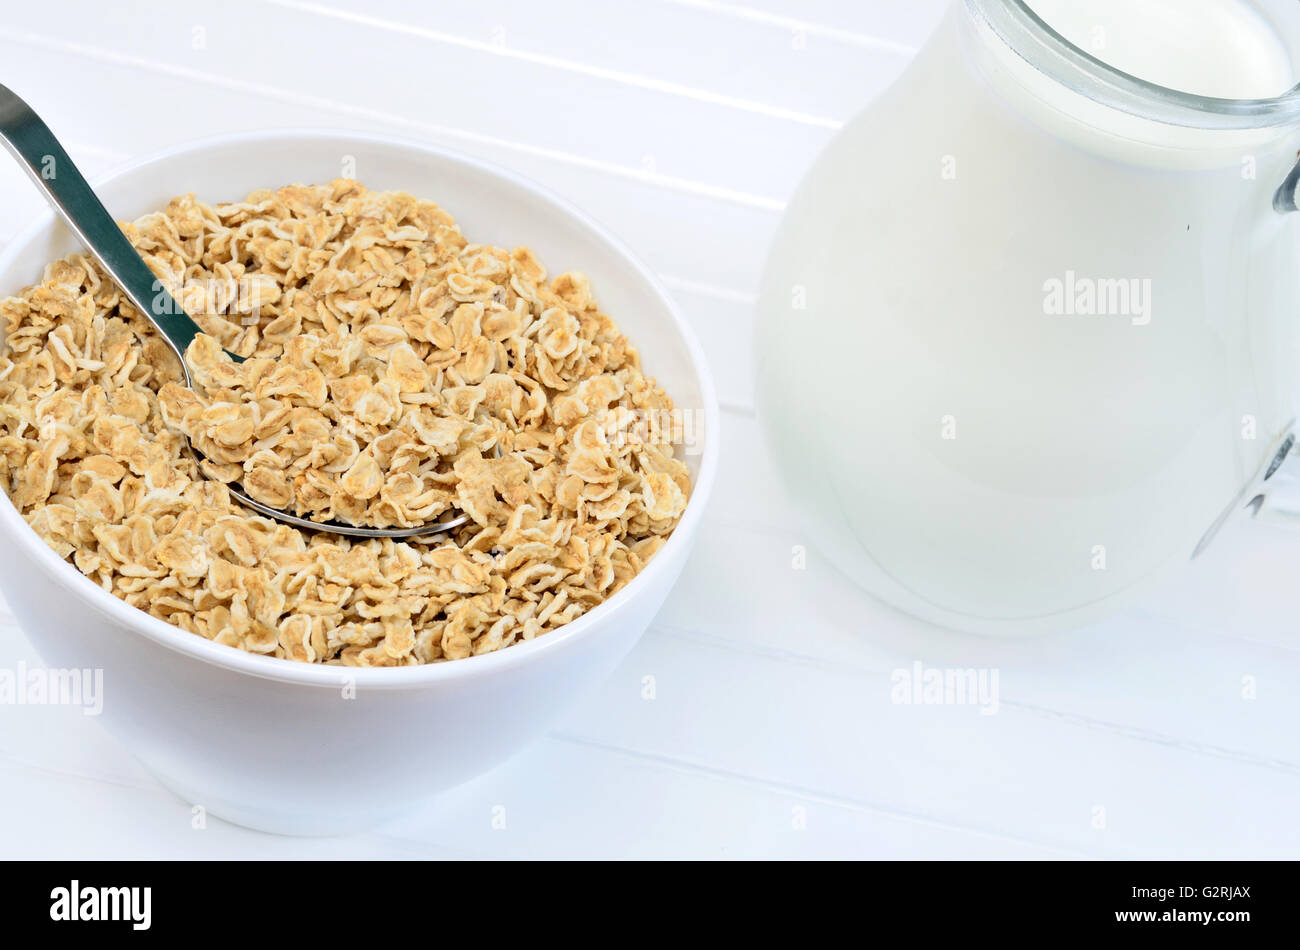 Oat flakes in a white bowl with milk on wooden table Stock Photo